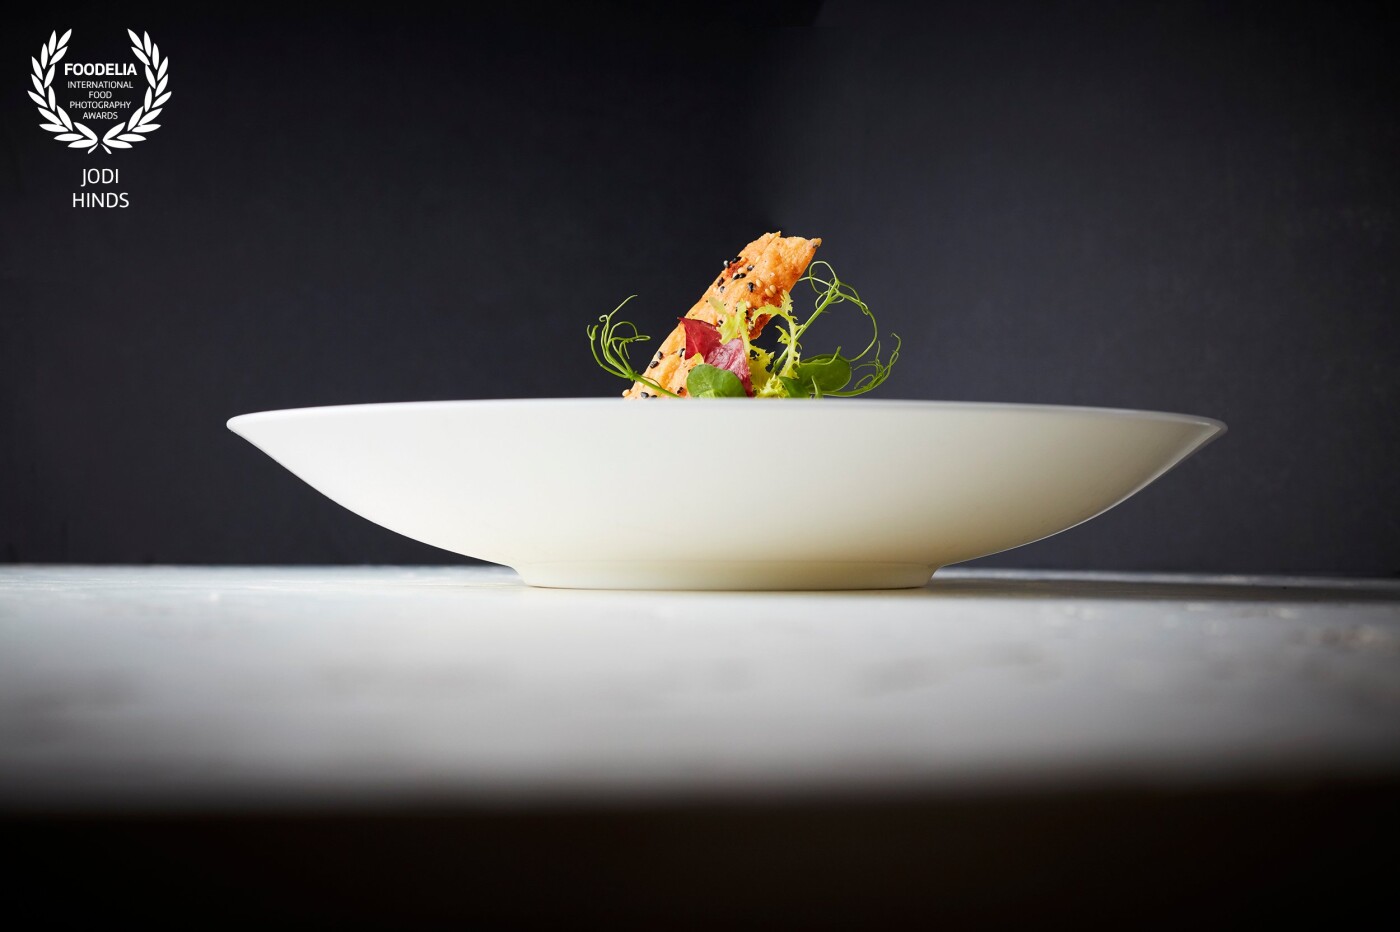 Stunning dish shot for Royal Crown Derby and Park Lane Hilton Hotel, London<br />
The shape of the dish really highlights the dish.<br />
